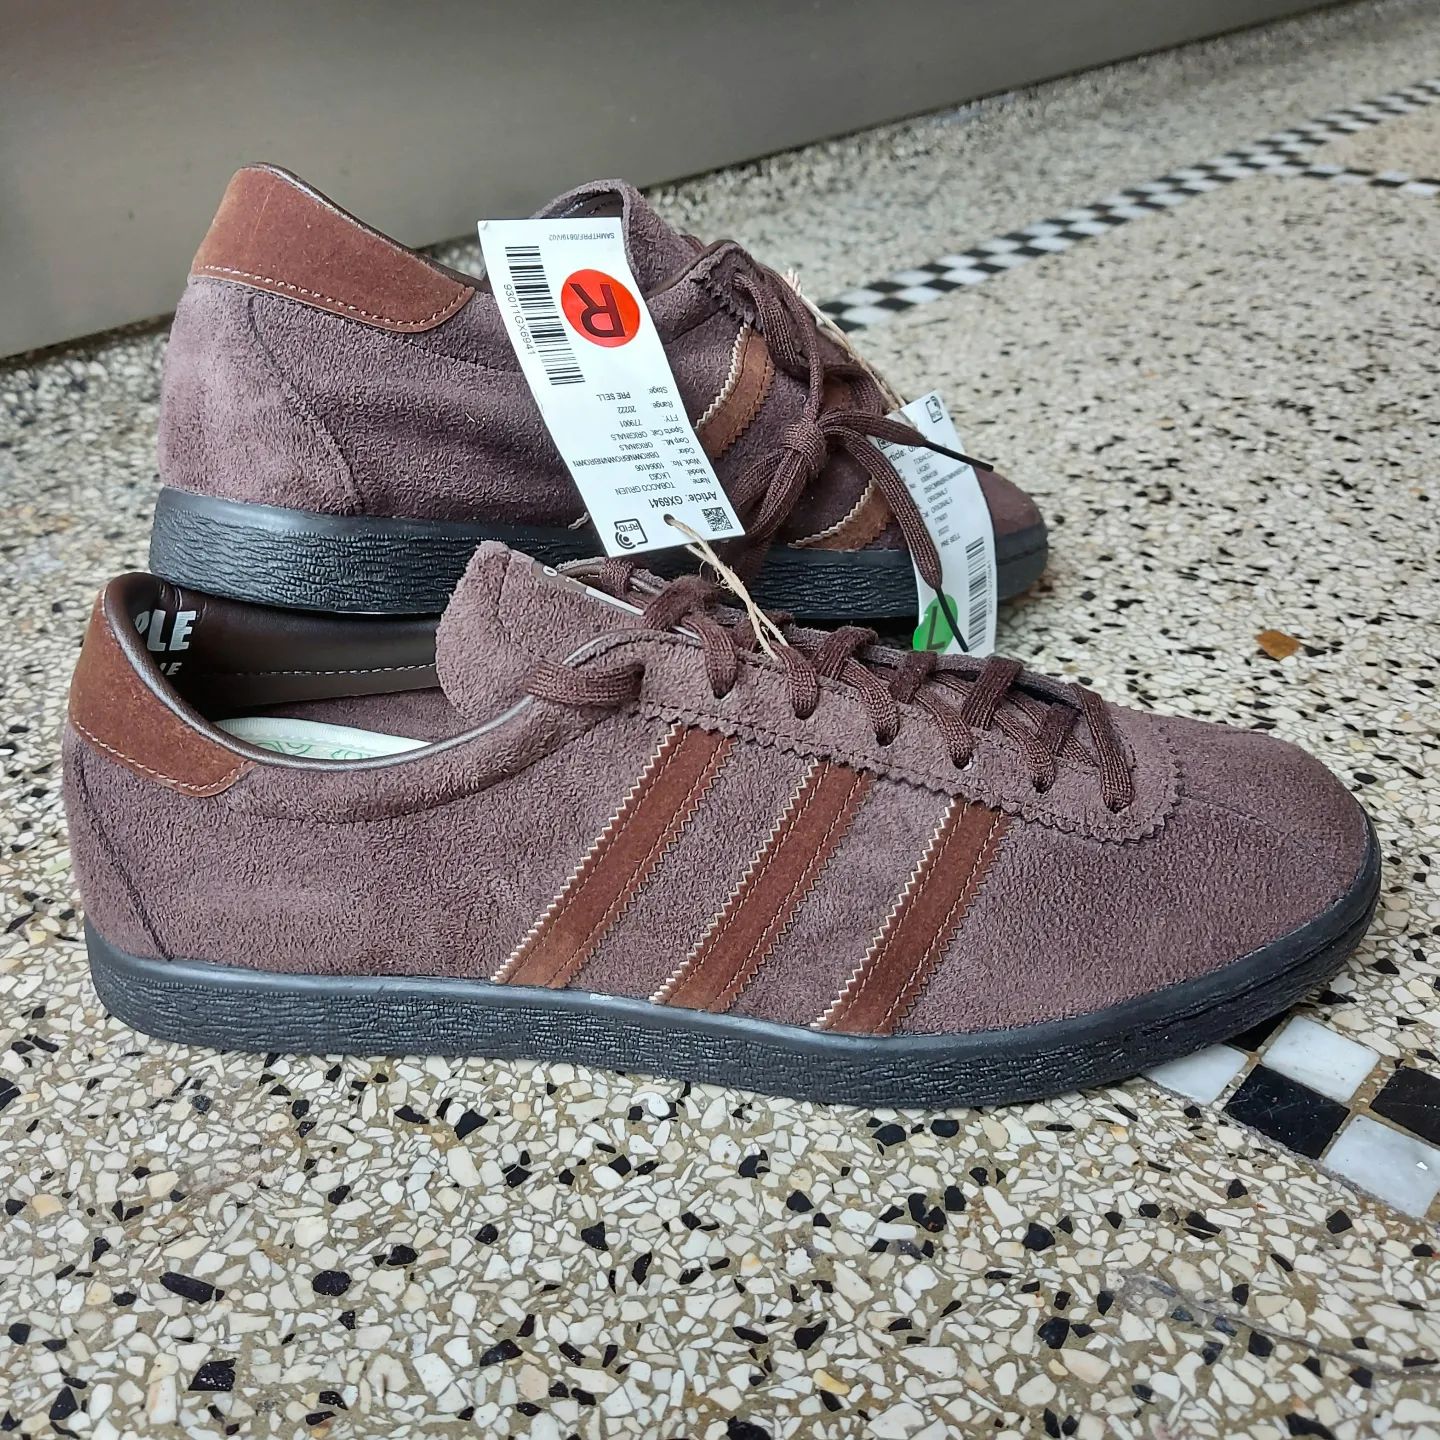 Martin on Twitter: "Tobacco 2022 sample 🔥🔥🔥 hope these get a adidas #Tobacco https://t.co/pPh38V6Zaq" /